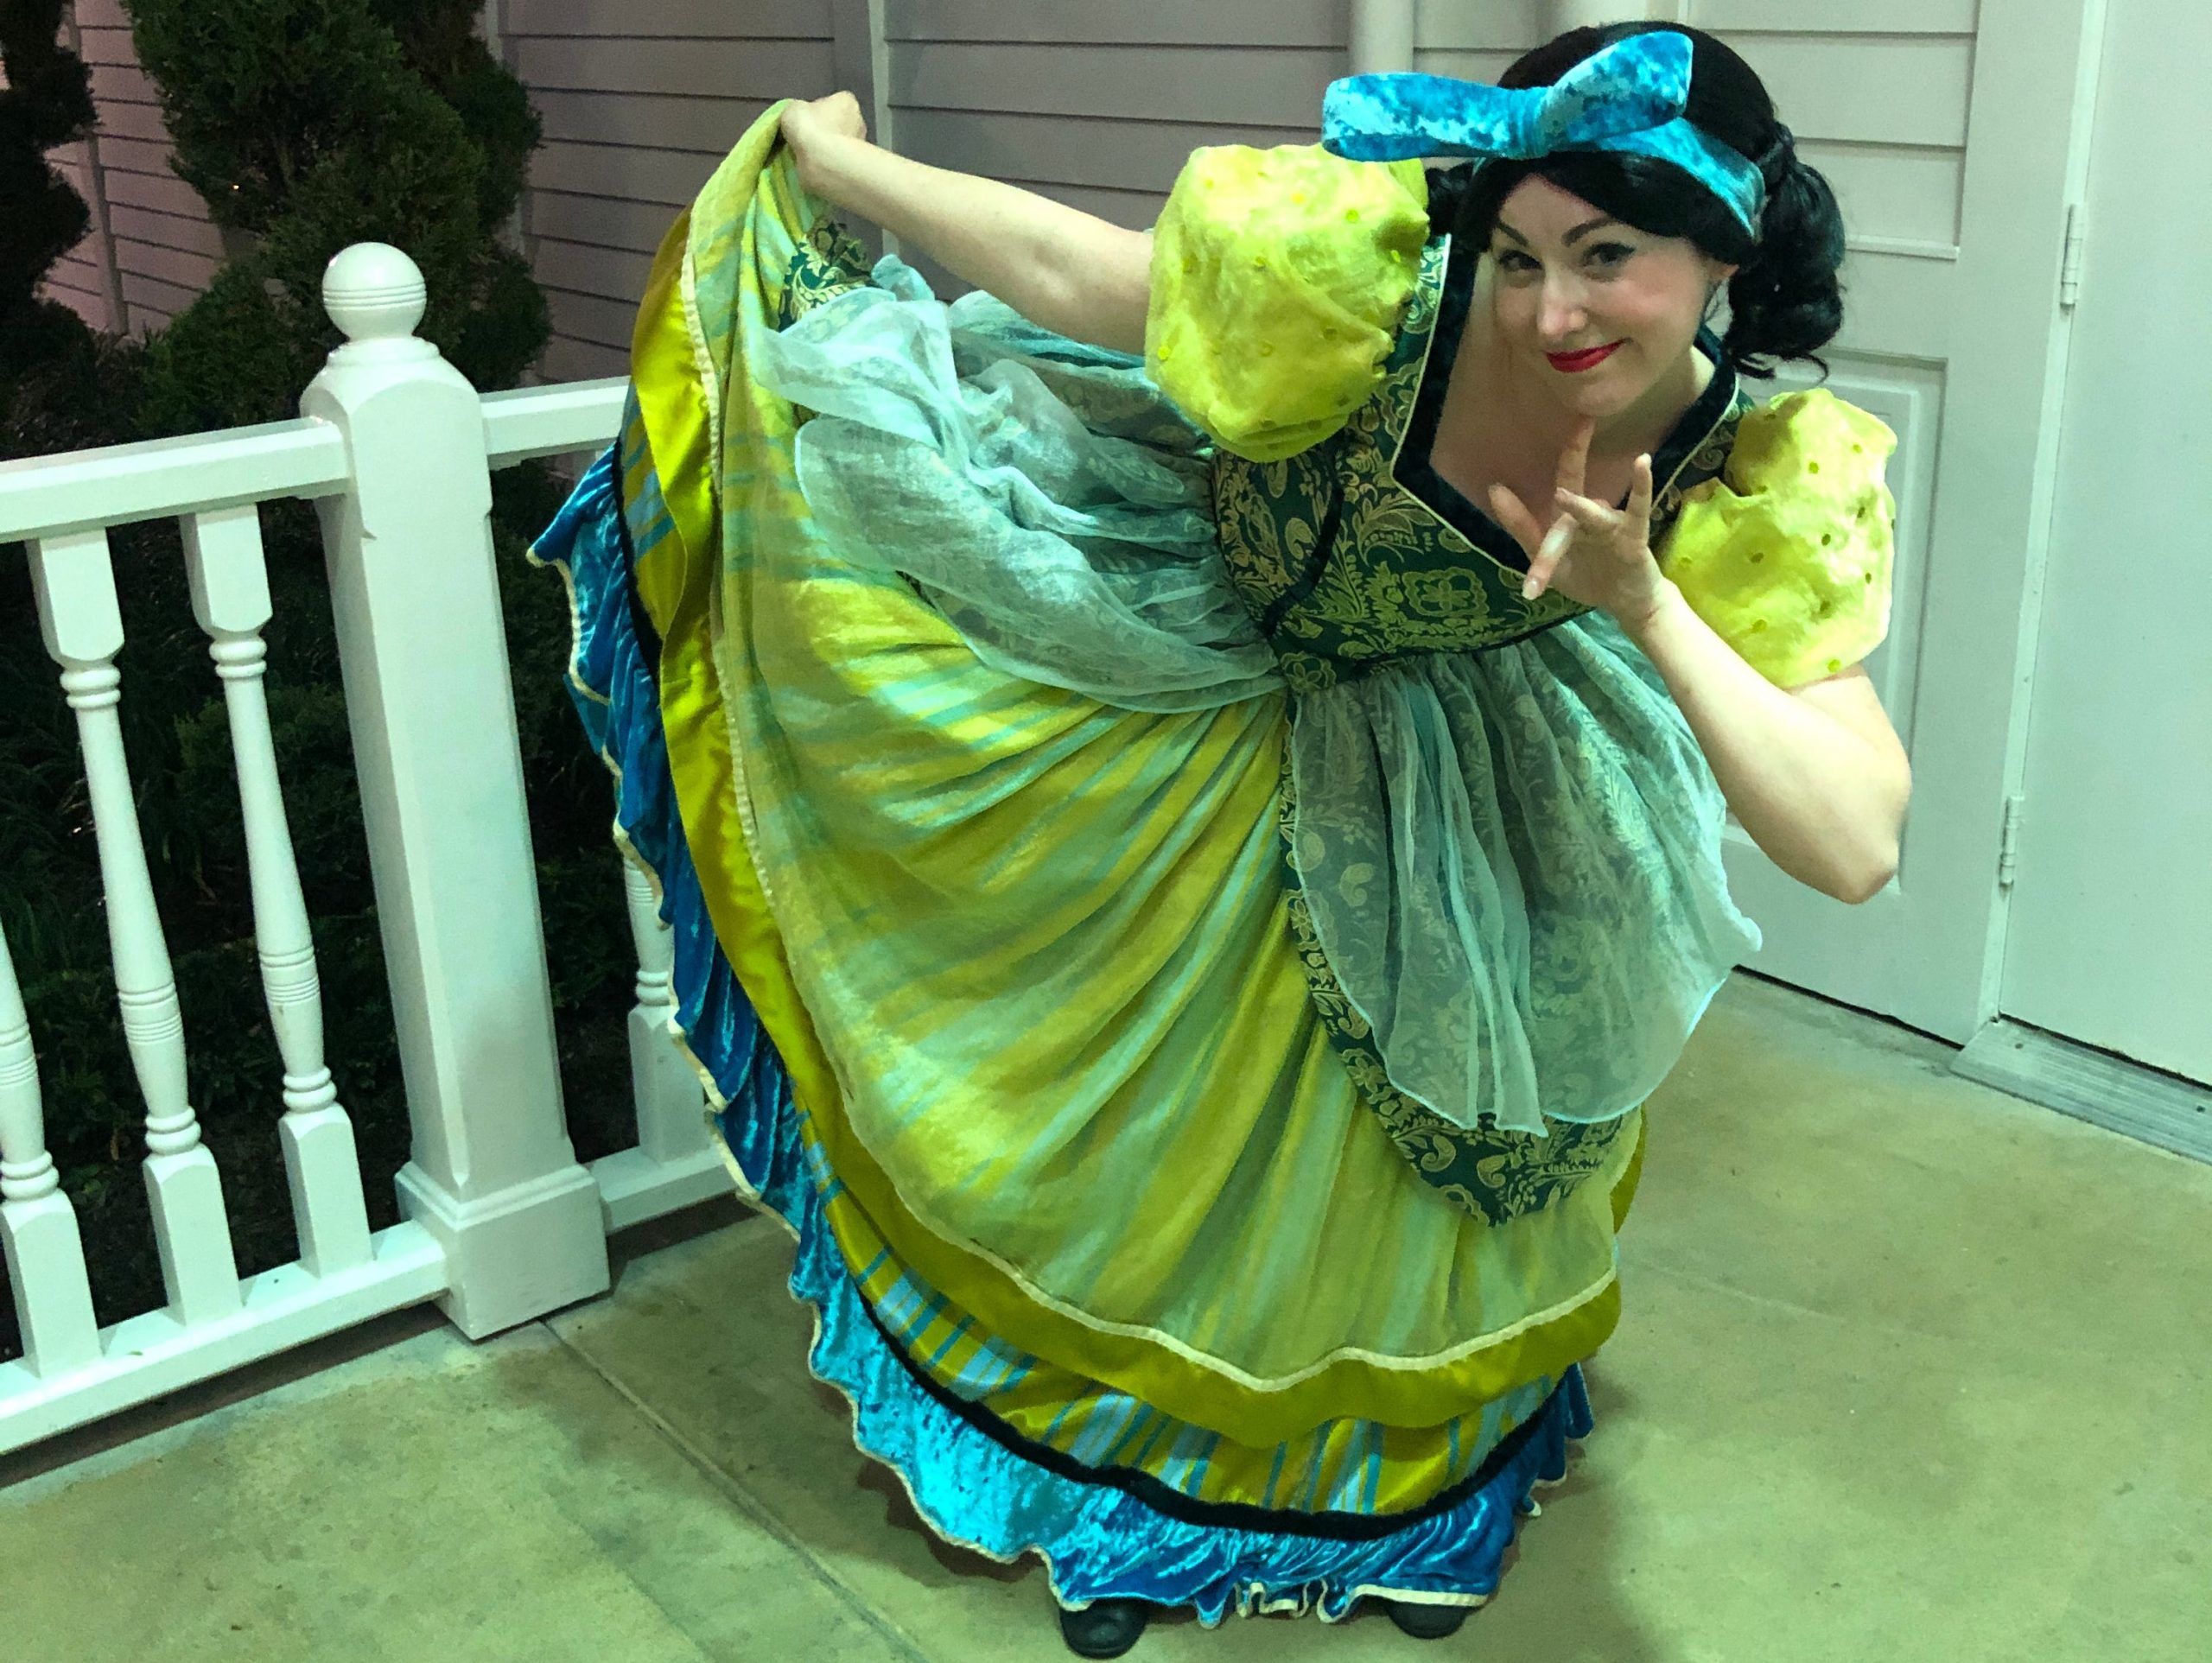 The writer posing in a Disney costume